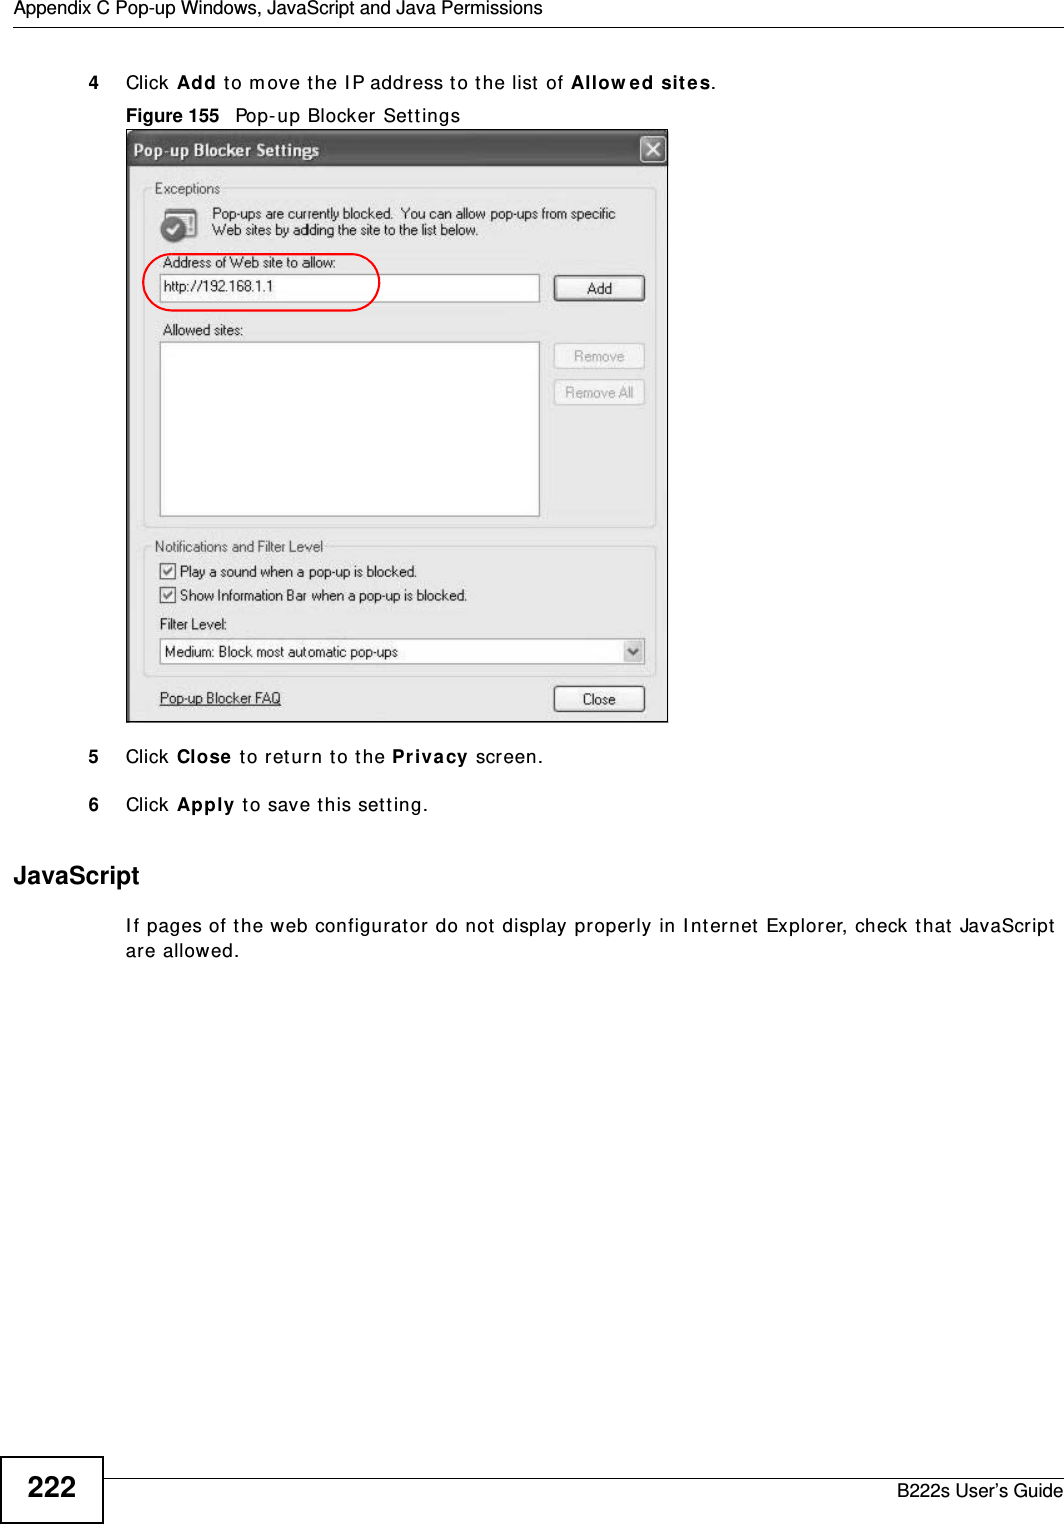 Appendix C Pop-up Windows, JavaScript and Java PermissionsB222s User’s Guide2224Click Add t o m ove the I P address t o t he list  of Allow e d sit es.Figure 155   Pop-up Blocker Set t ings5Click Close t o ret urn to t he Pr iva cy screen. 6Click Apply t o save this sett ing. JavaScriptI f pages of t he web configurat or do not display properly in I nternet  Explorer, check that JavaScript  are allowed. 